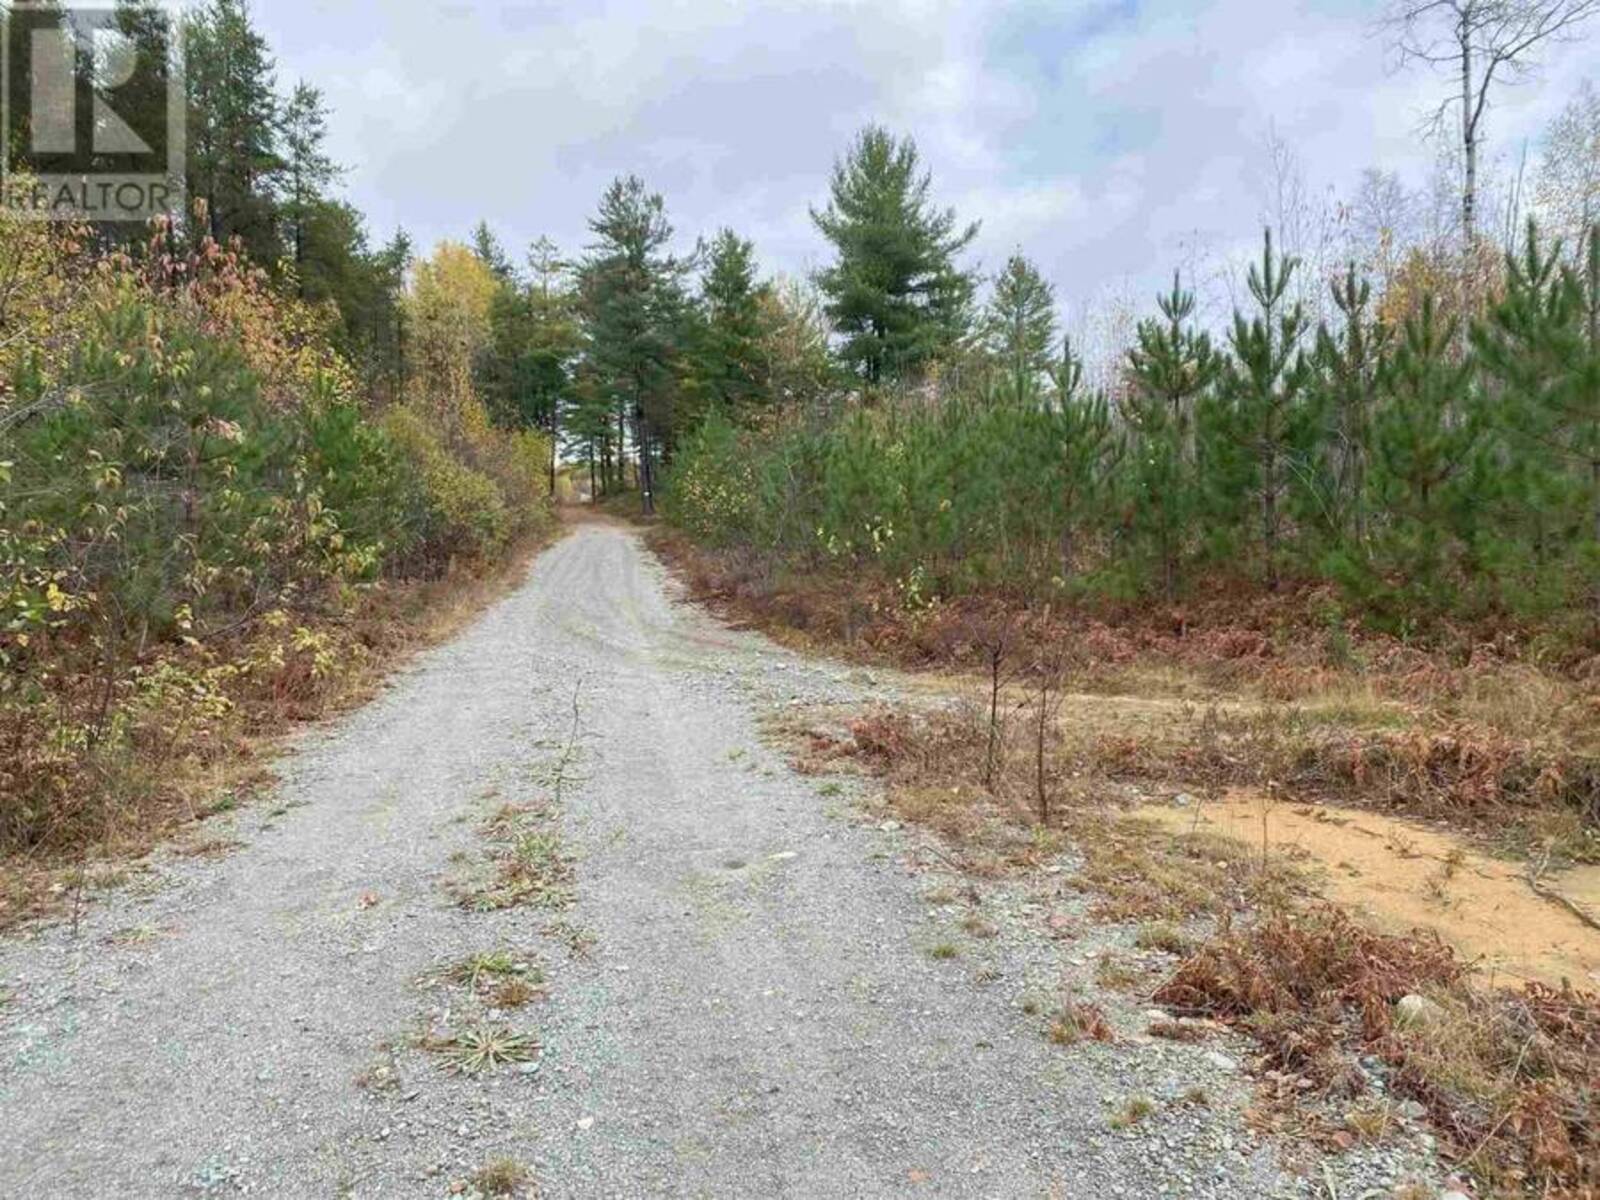 Lot 1 Con 5 PCL 6283, 6284, 6285, 6286 West of Road, Marter, Ontario P0J 1H0